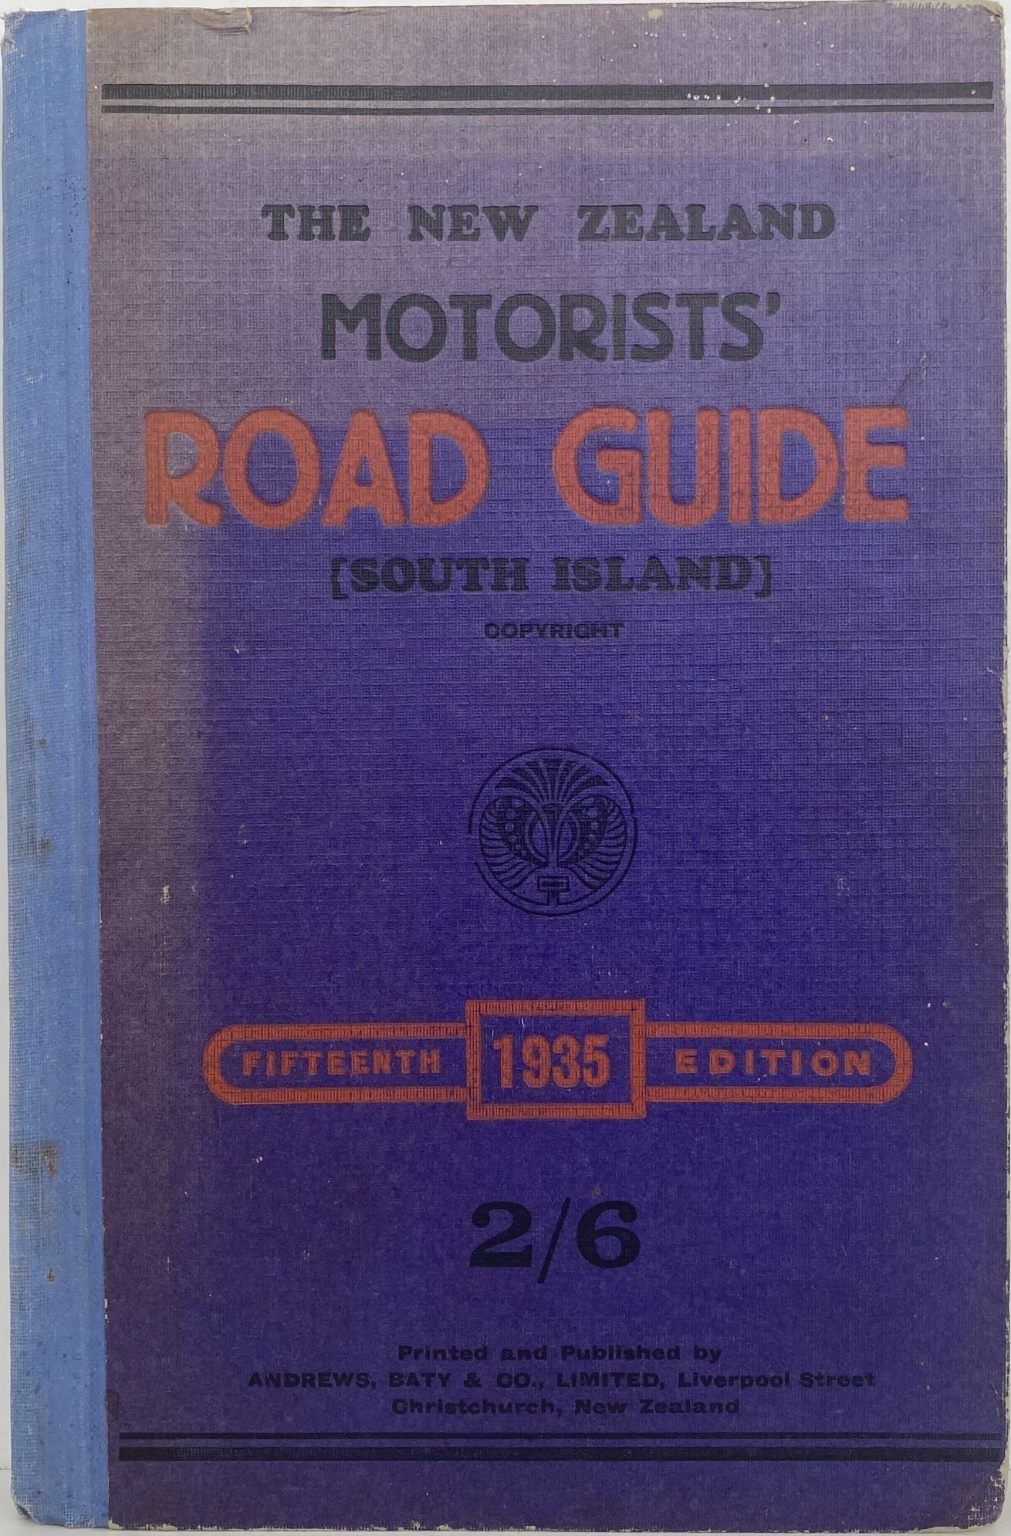 The New Zealand MOTORISTS ROAD GUIDE - Fifteenth Edition 1935